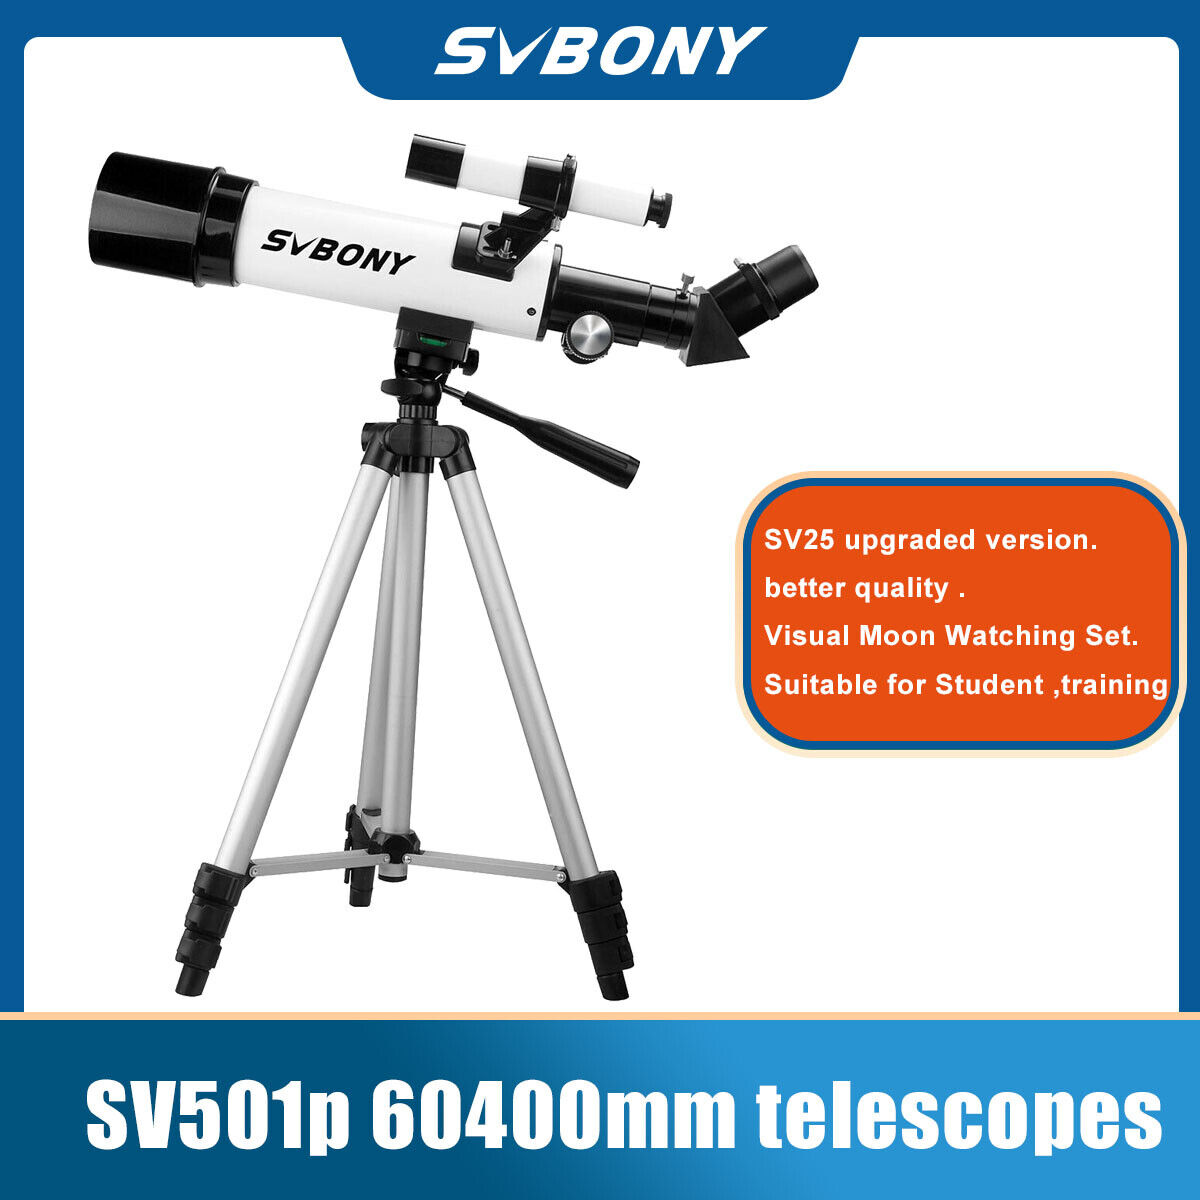 SVBONY Astronomical Telescope SV501 Beginners HD Night Vision Deep Space gifts